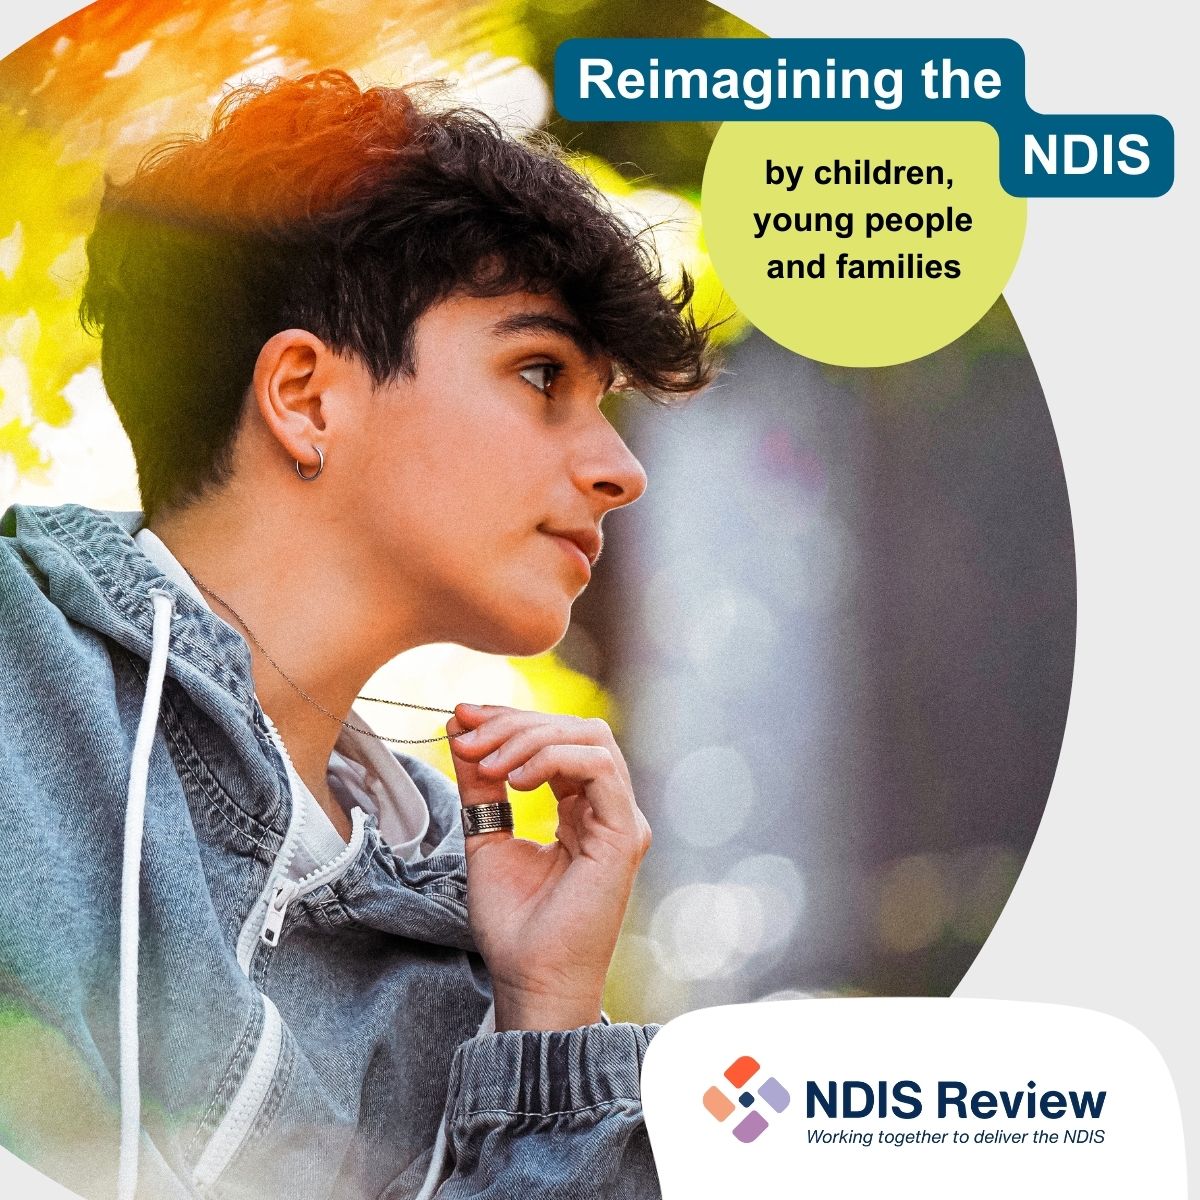 young person facing side on looking into the distance, with short curly hair, an earing and playing with a necklace. With the words Reimagining the NDIS by children, young people and families.